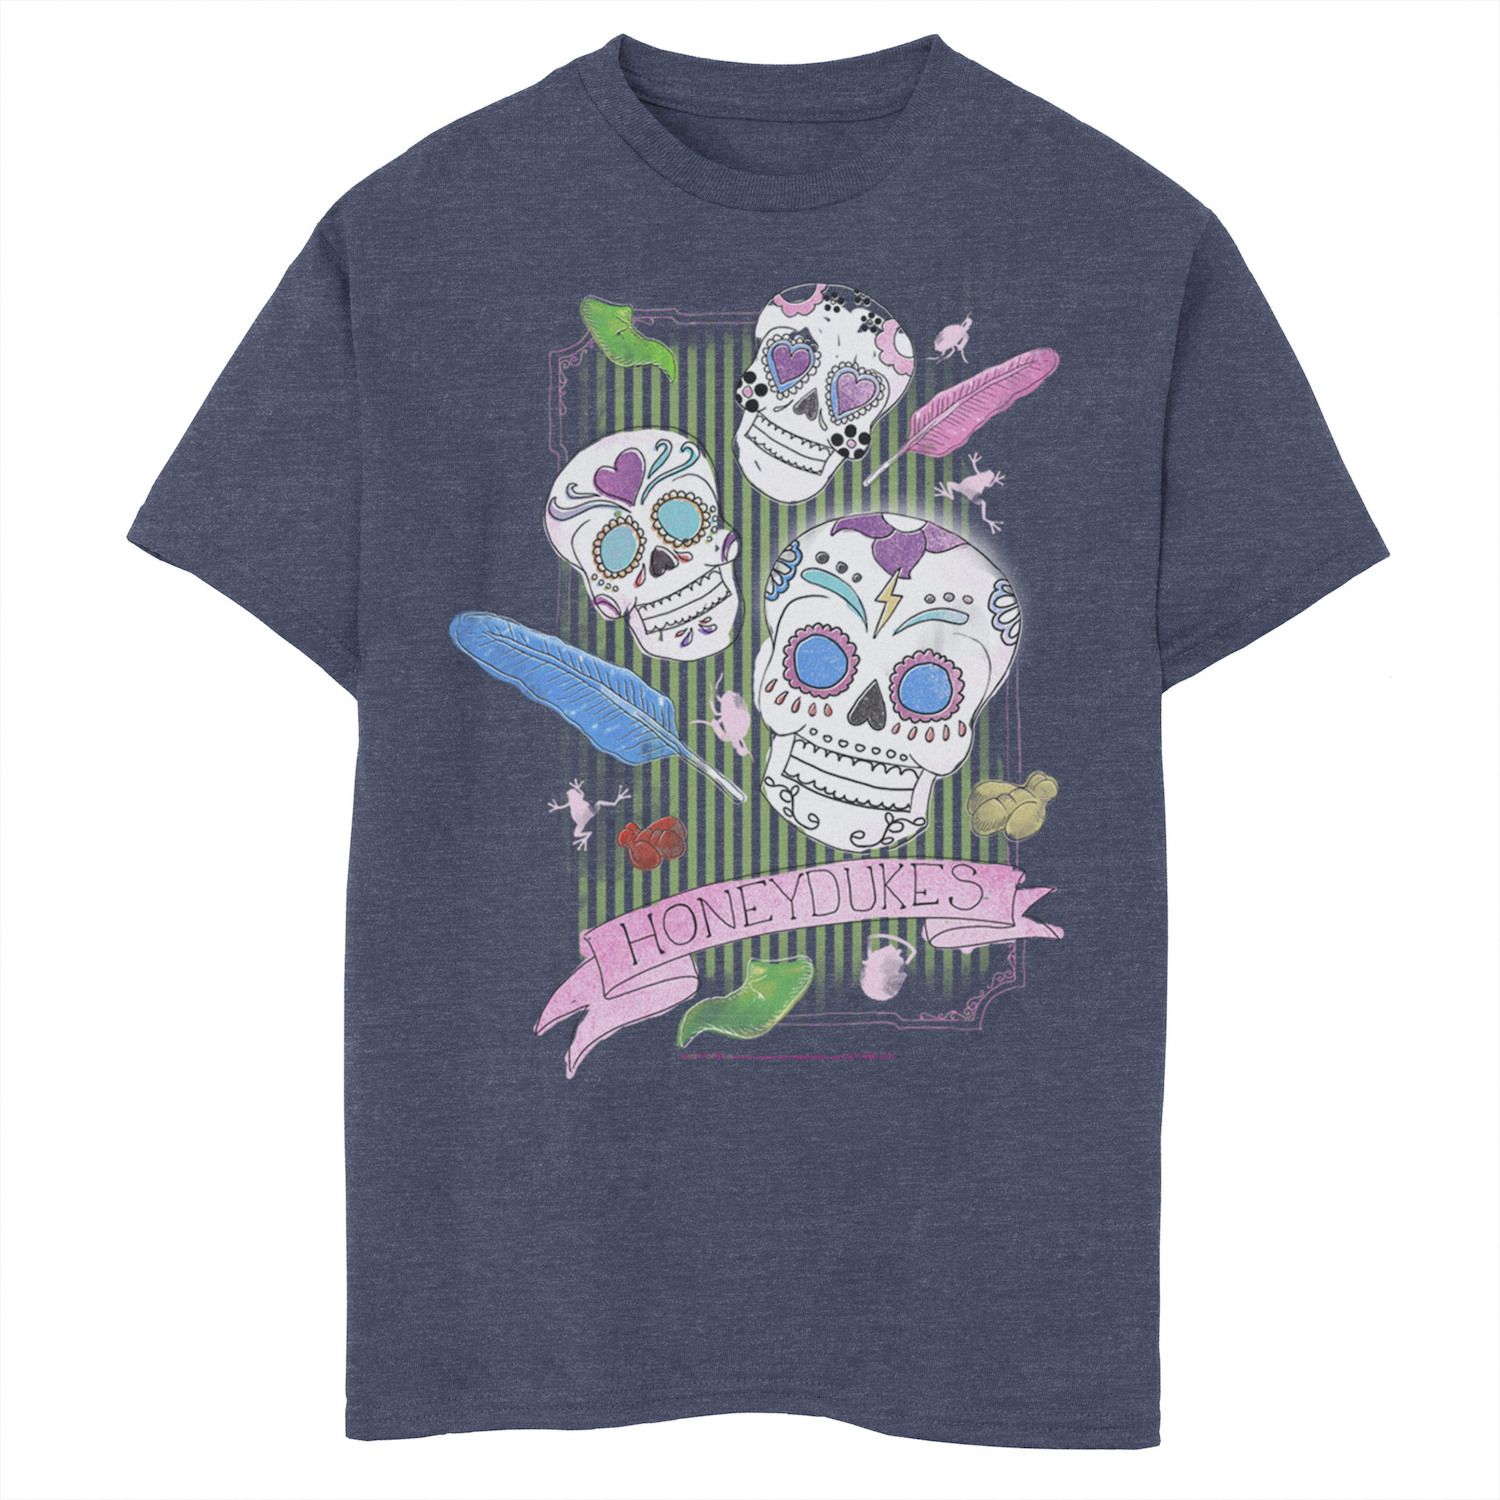 Image for Harry Potter Boys 8-20 "Honeydukes" Graphic Tee at Kohl's.